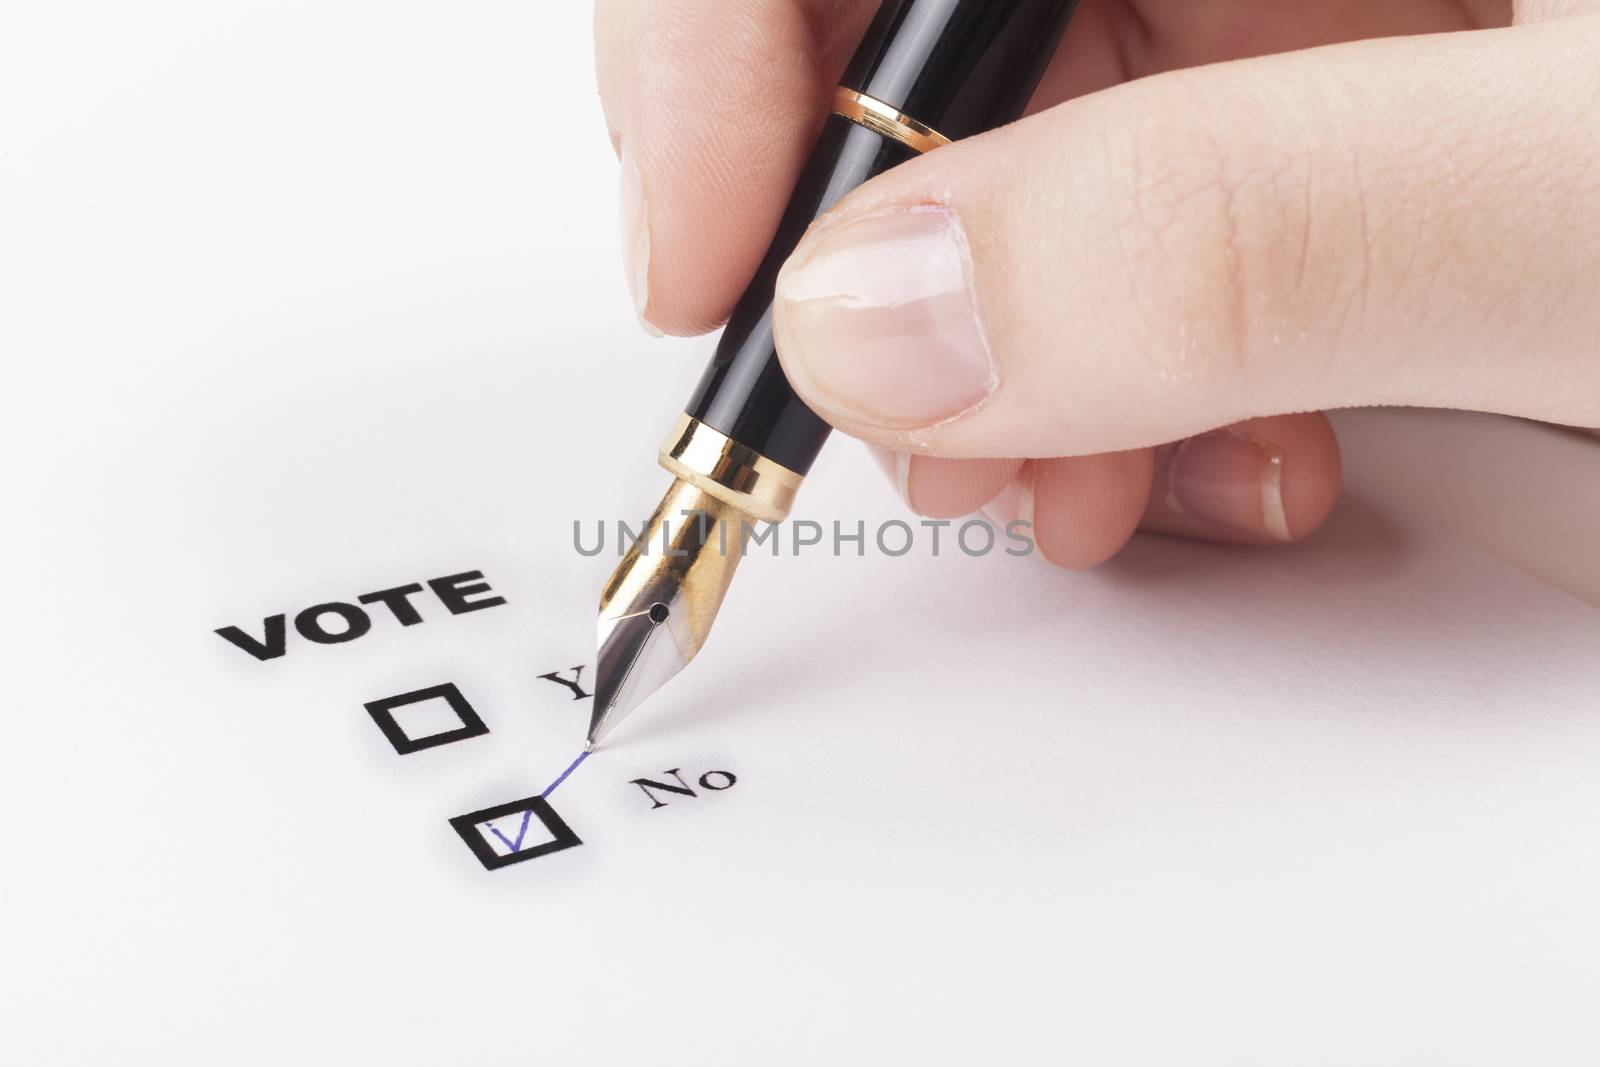 Woman hand voting no in check-box with blue fountain pen